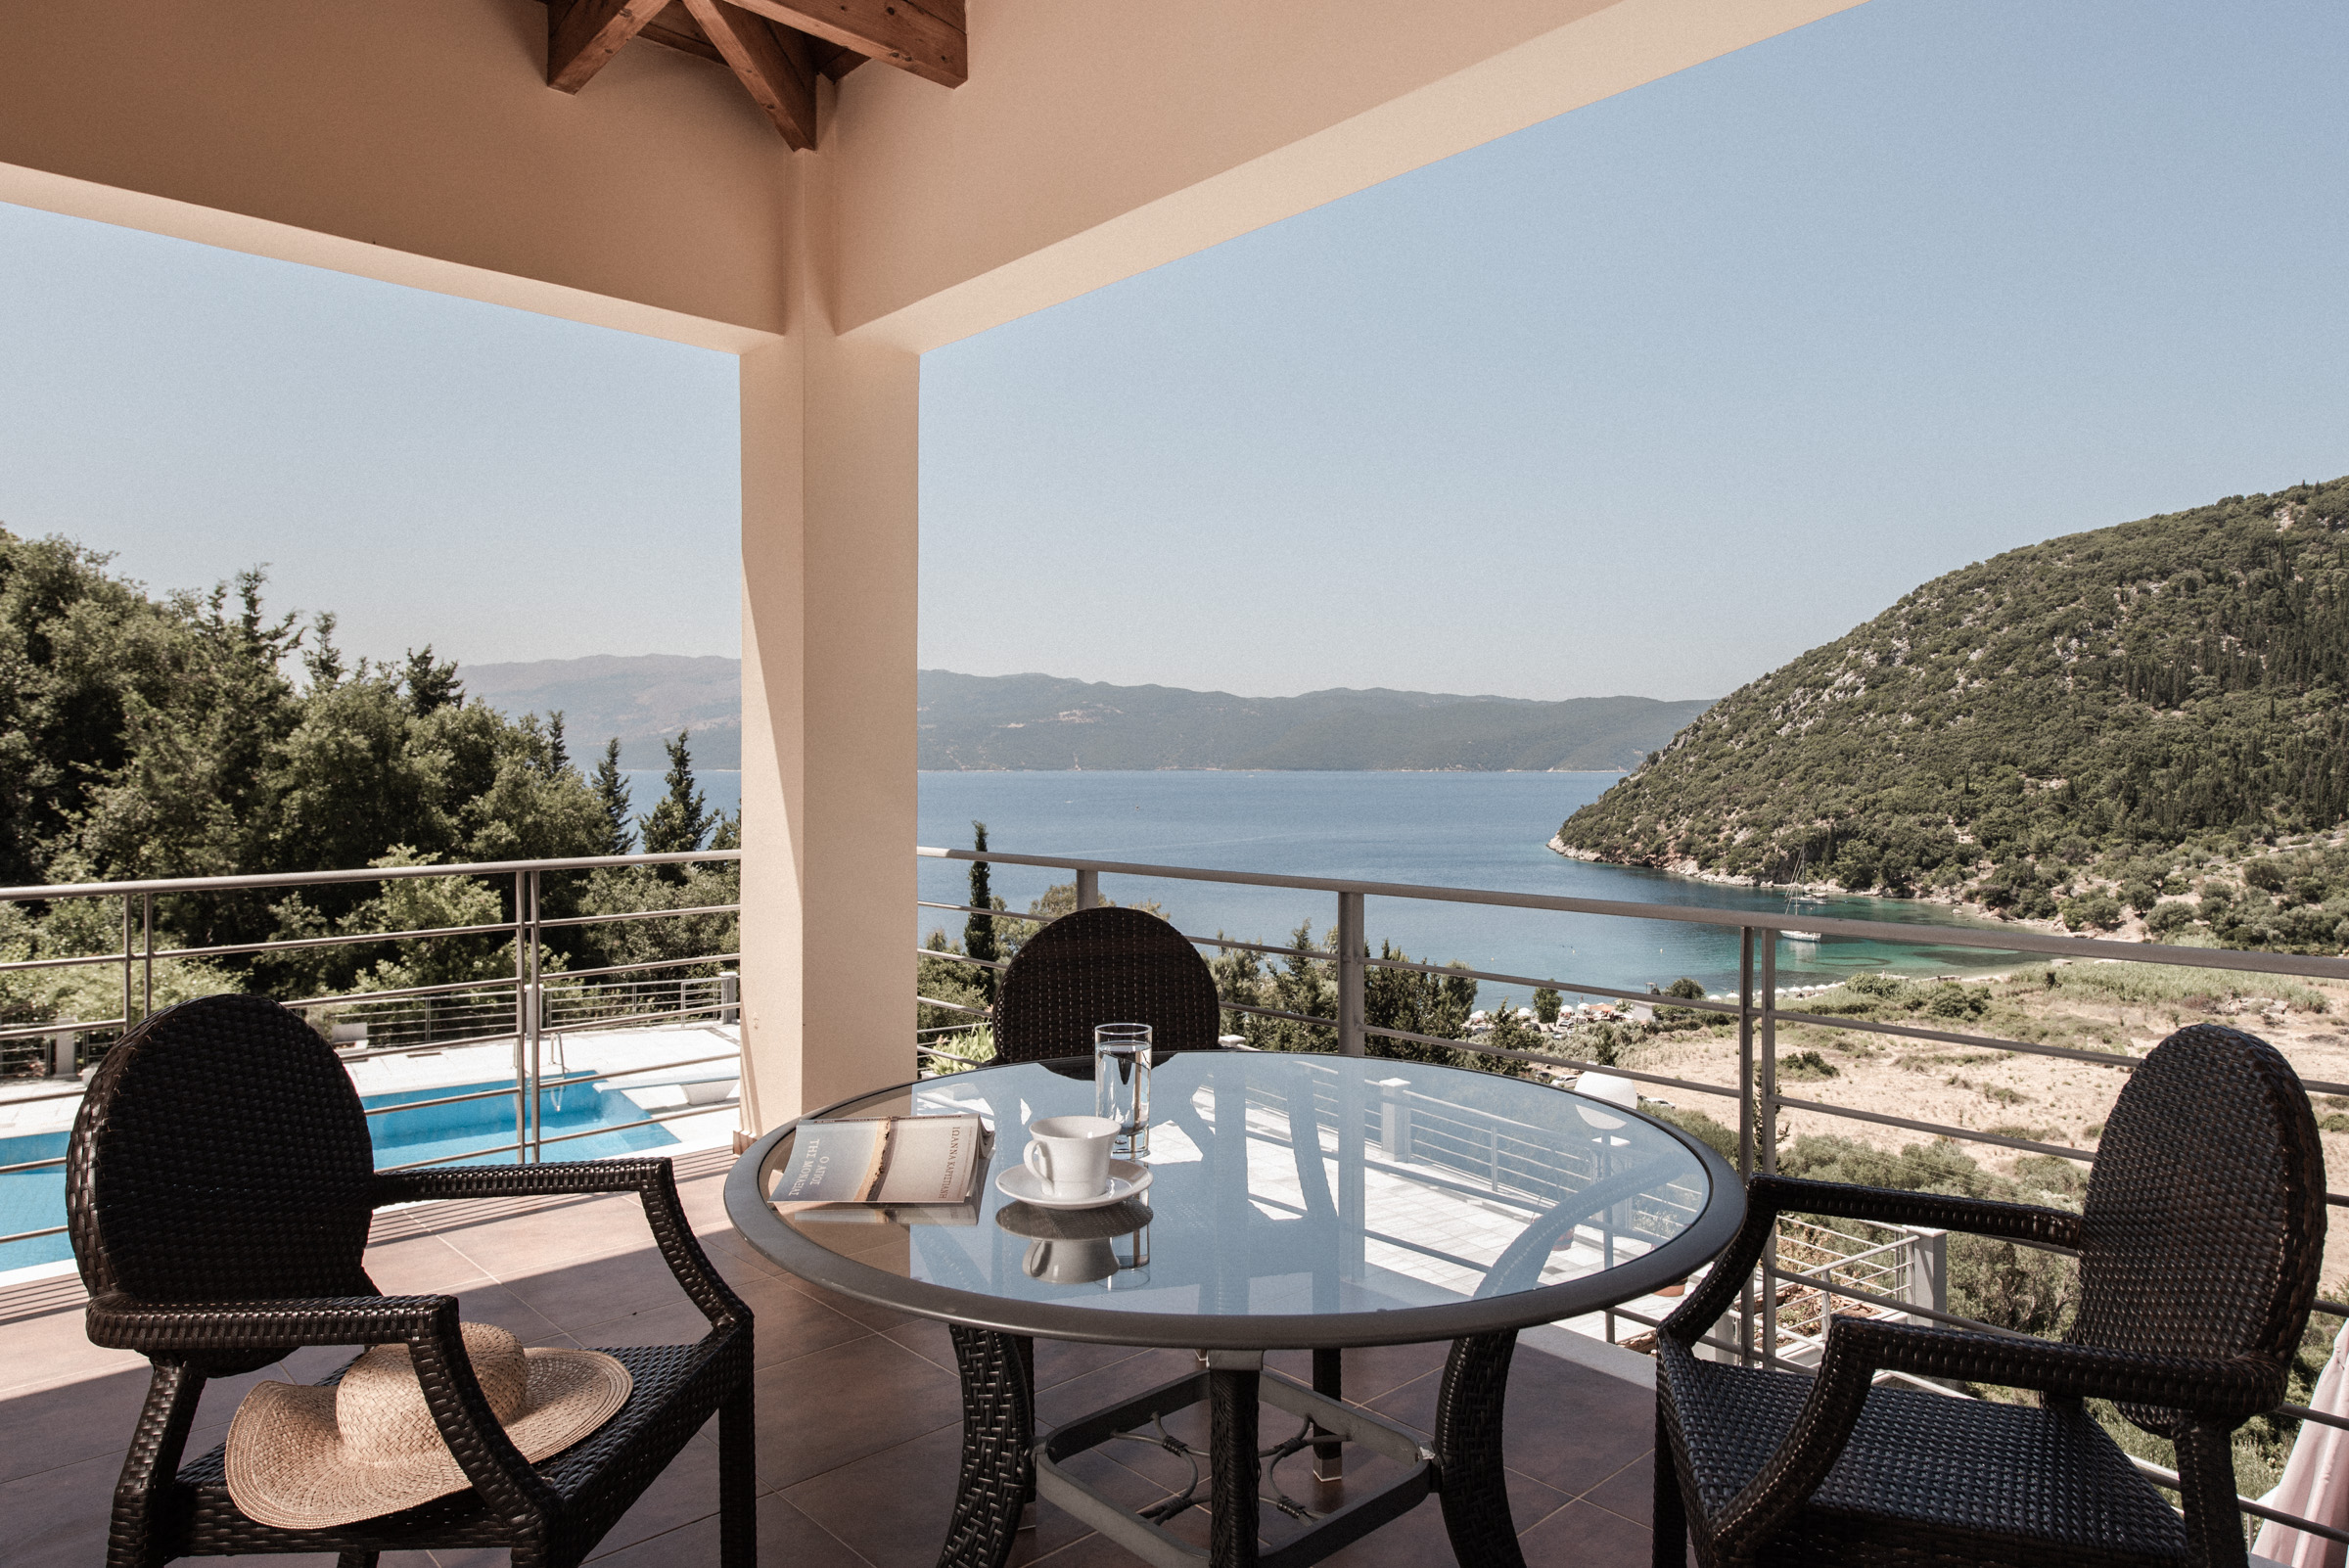 Outdoor pool area of villa for rent on Ithaca Greece, Stavros